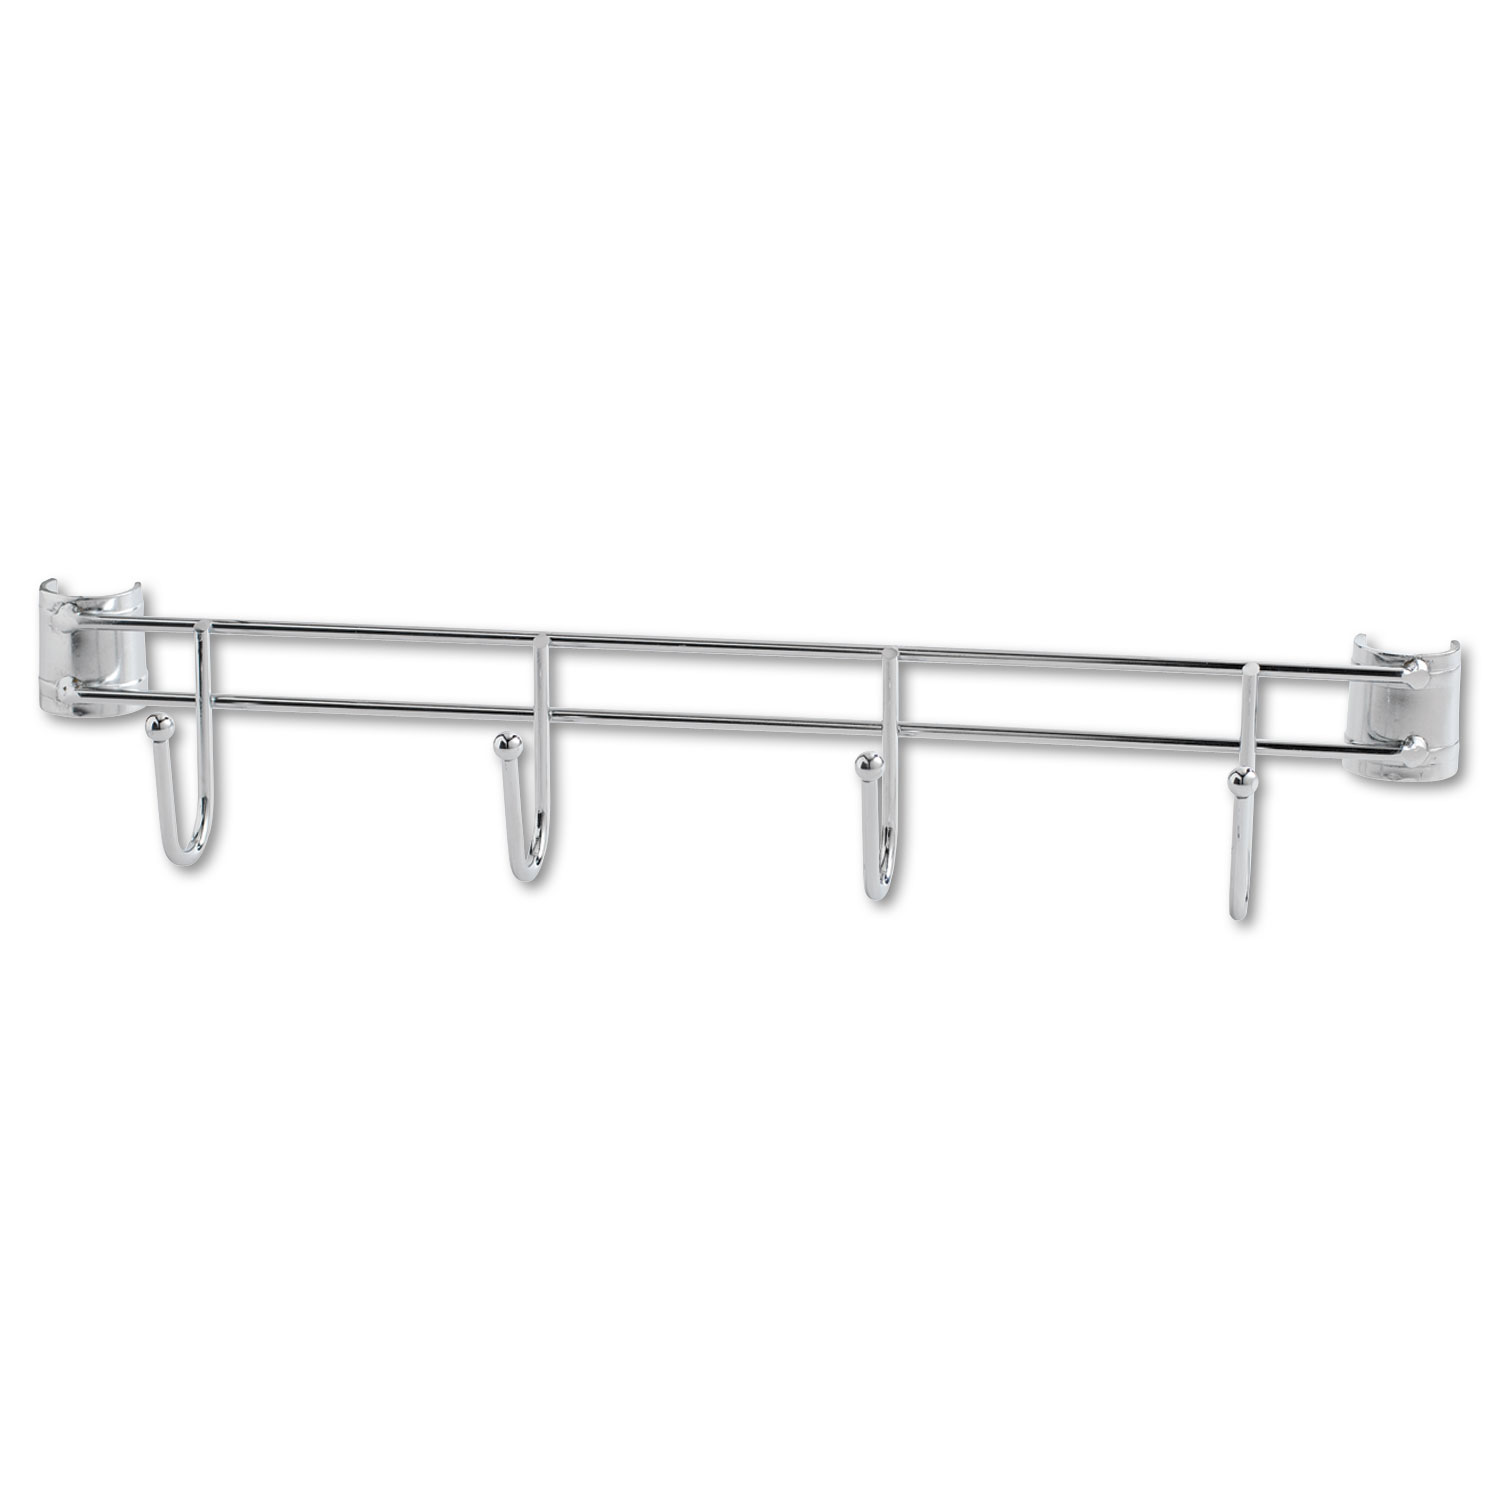 Hook Bars For Wire Shelving, Four Hooks, 18 Deep, Silver, 2 Bars/Pack